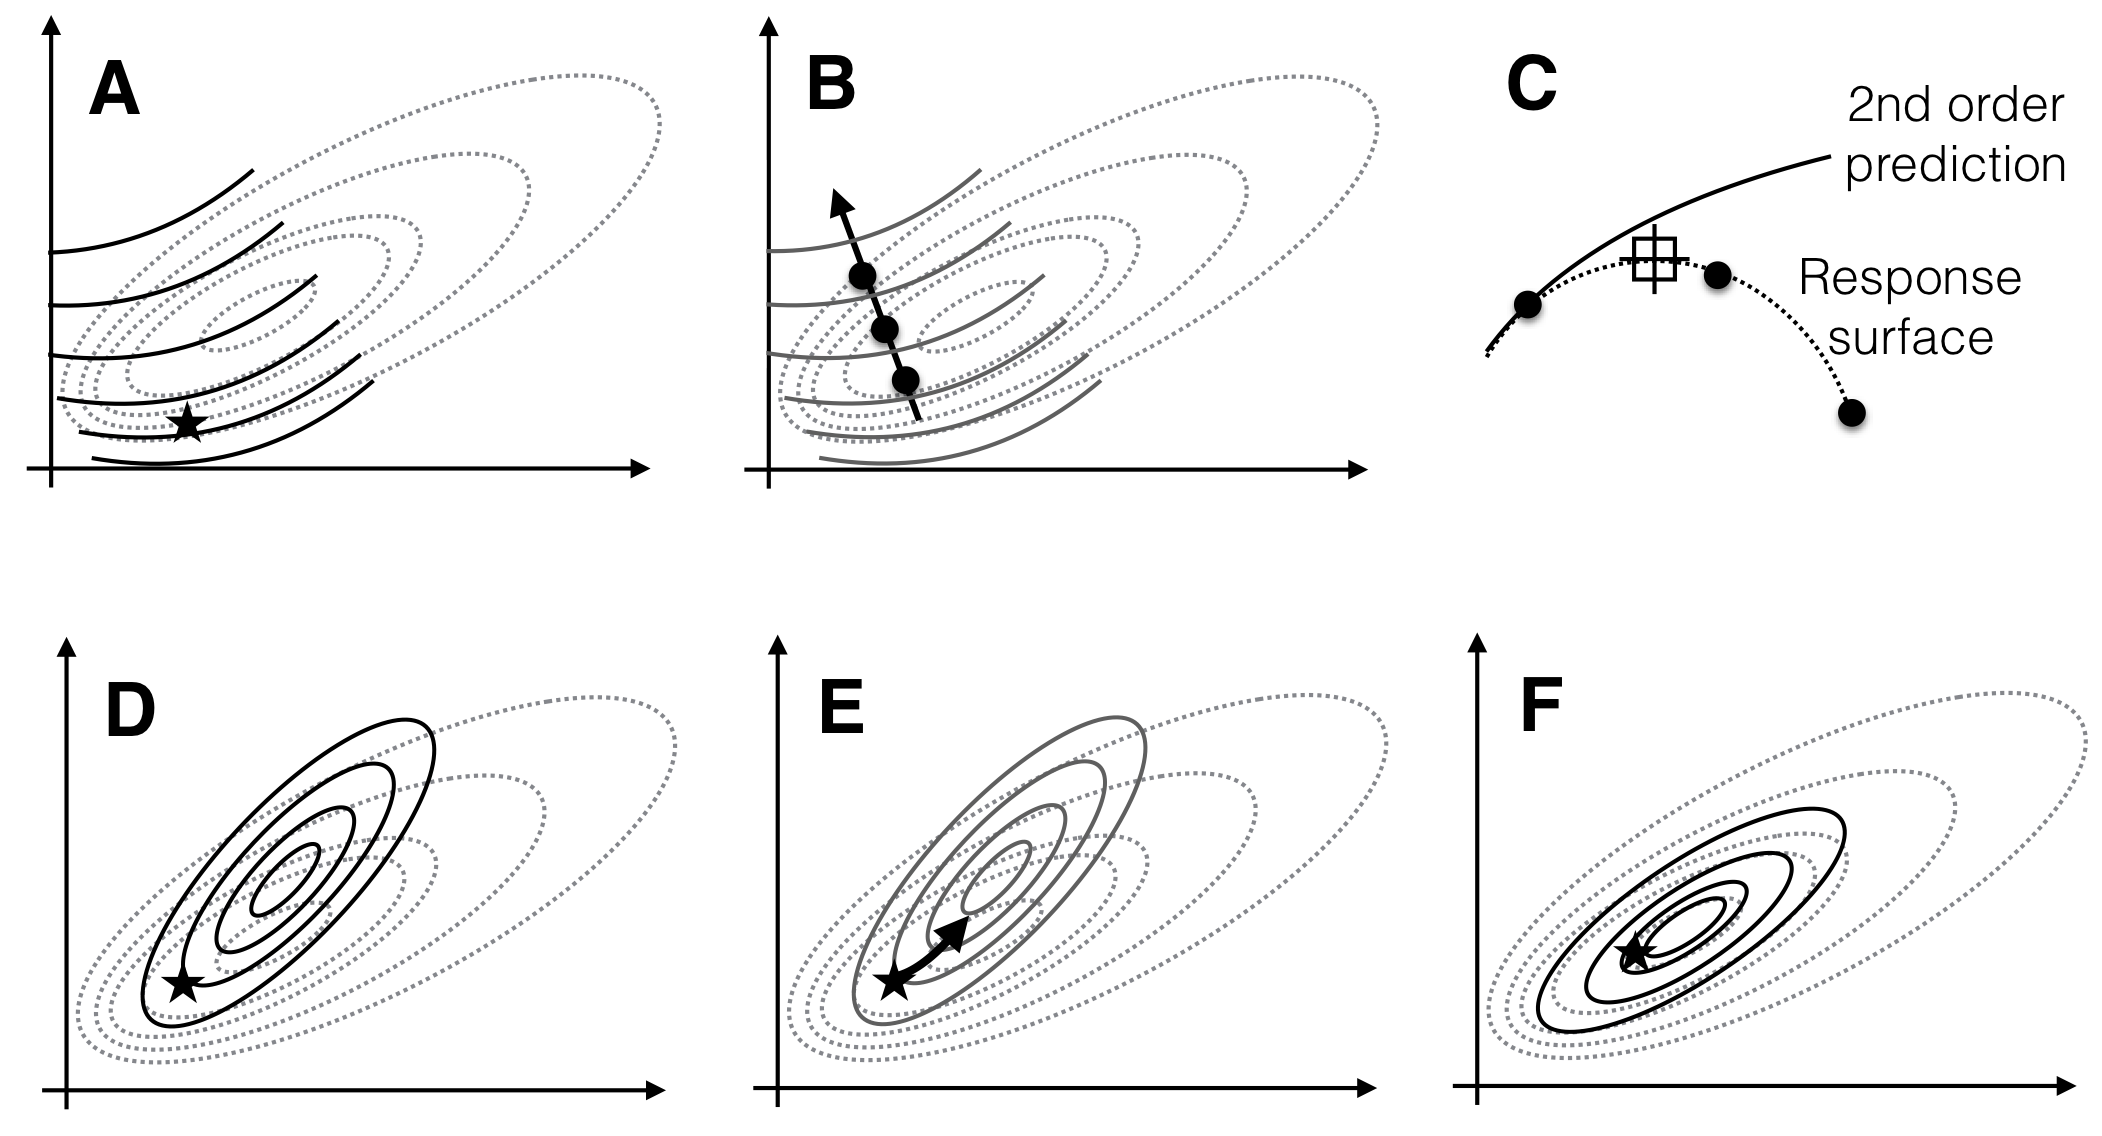 Sequential experimentation for optimization of conditions using second-order approximations. A: first approximation (solid lines) of true response surface (dotted lines) around a starting point (star) only describes the local increase towards the top-left. B: pursuing the path of steepest ascent yields a new best condition, but prediction and measurements diverge further out from the starting point. C: a slice along the path of steepest ascent highlights the divergence and the new best condition. D: second approximation around new best condition. E: path of steepest ascent based on second approximation. F: third approximation correctly identifies the optimum and captures the properties of the response surface around this optimum.